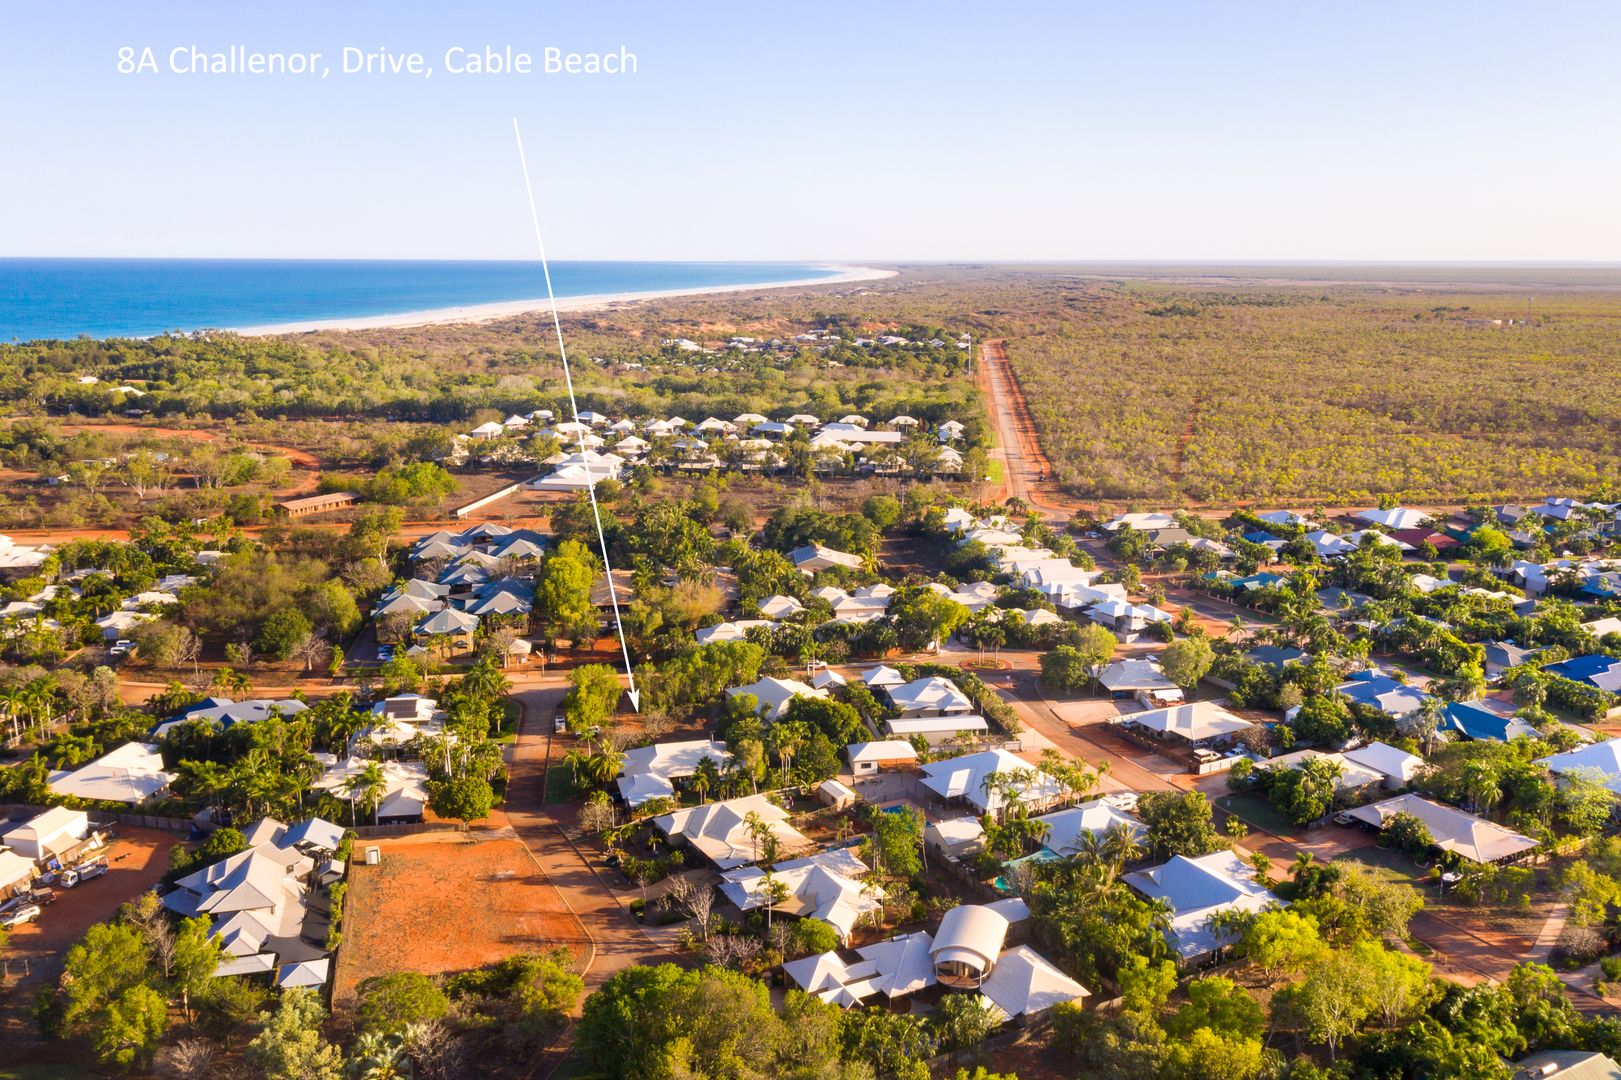 Lot A/8 Challenor Drive, Cable Beach WA 6726, Image 1